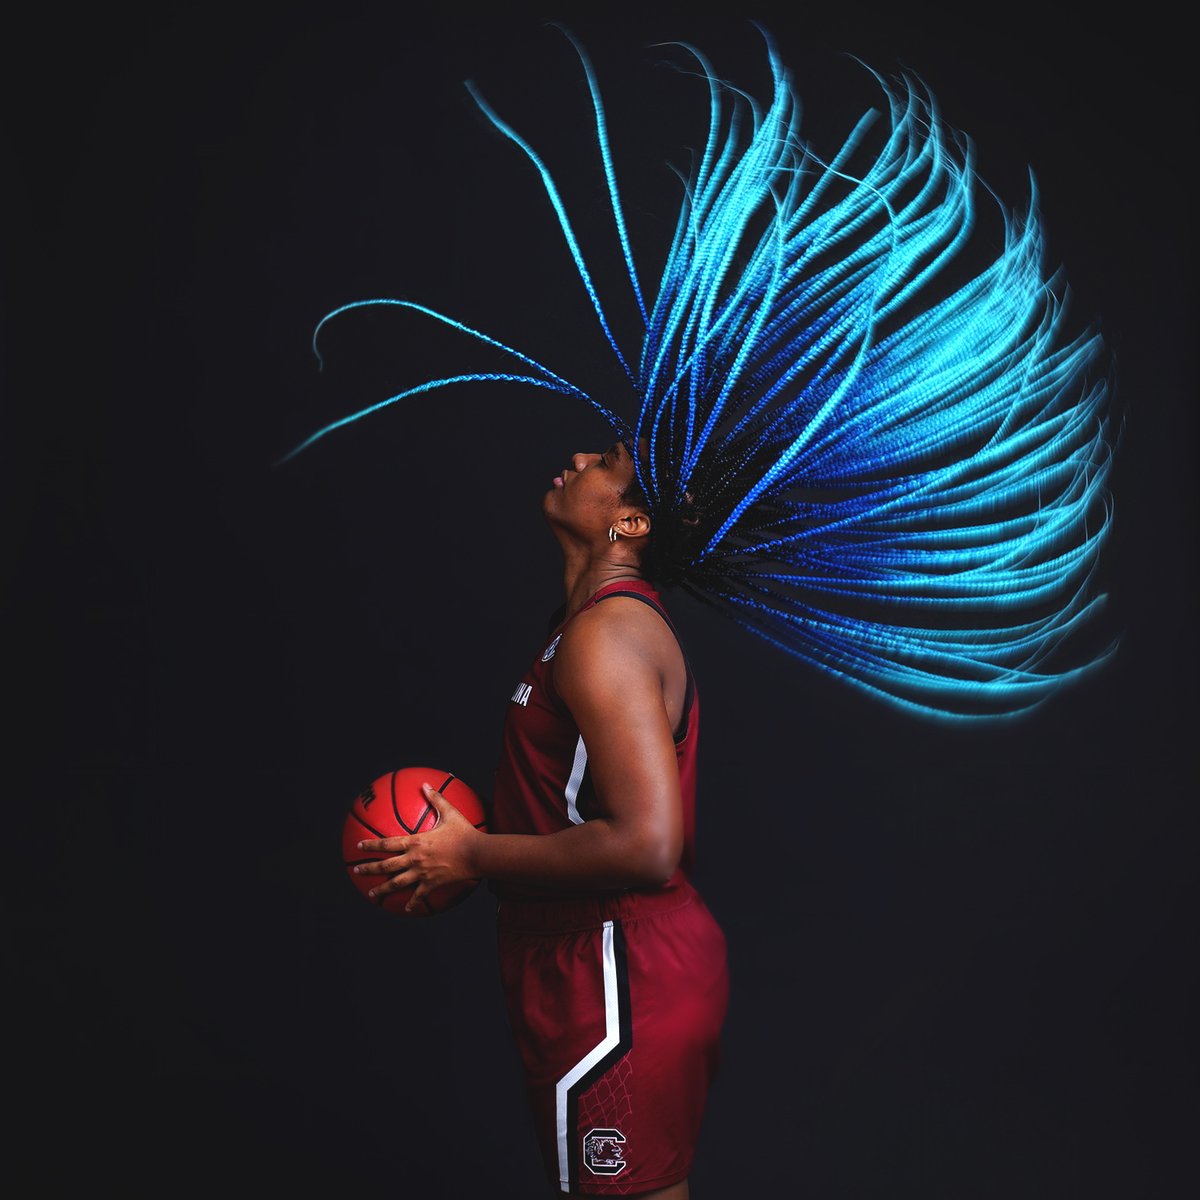 “I hope that I’m able to inspire younger Black girls to have the confidence to play whatever sport they want.”

@aa_boston leads her team @GamecockWBB into her first-ever #MarchMadness — and paves the way for many to follow.

#ShareBlackStories 🖤 #SeeMe

instagram.com/p/CMr7LFWMKSw/